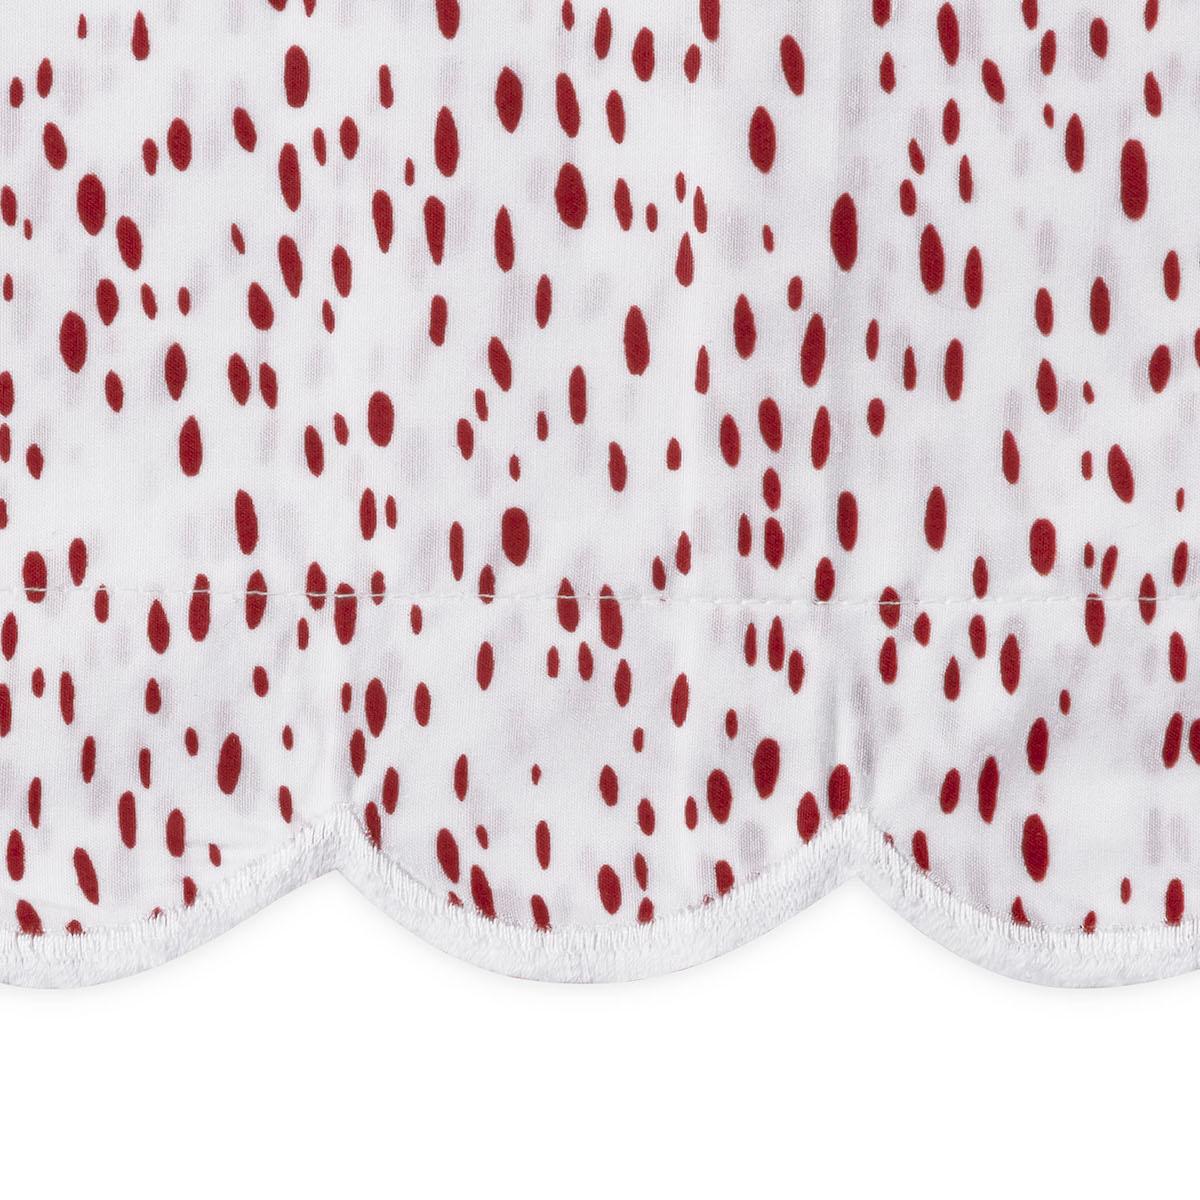 Celine Fitted Sheet_REDBERRY